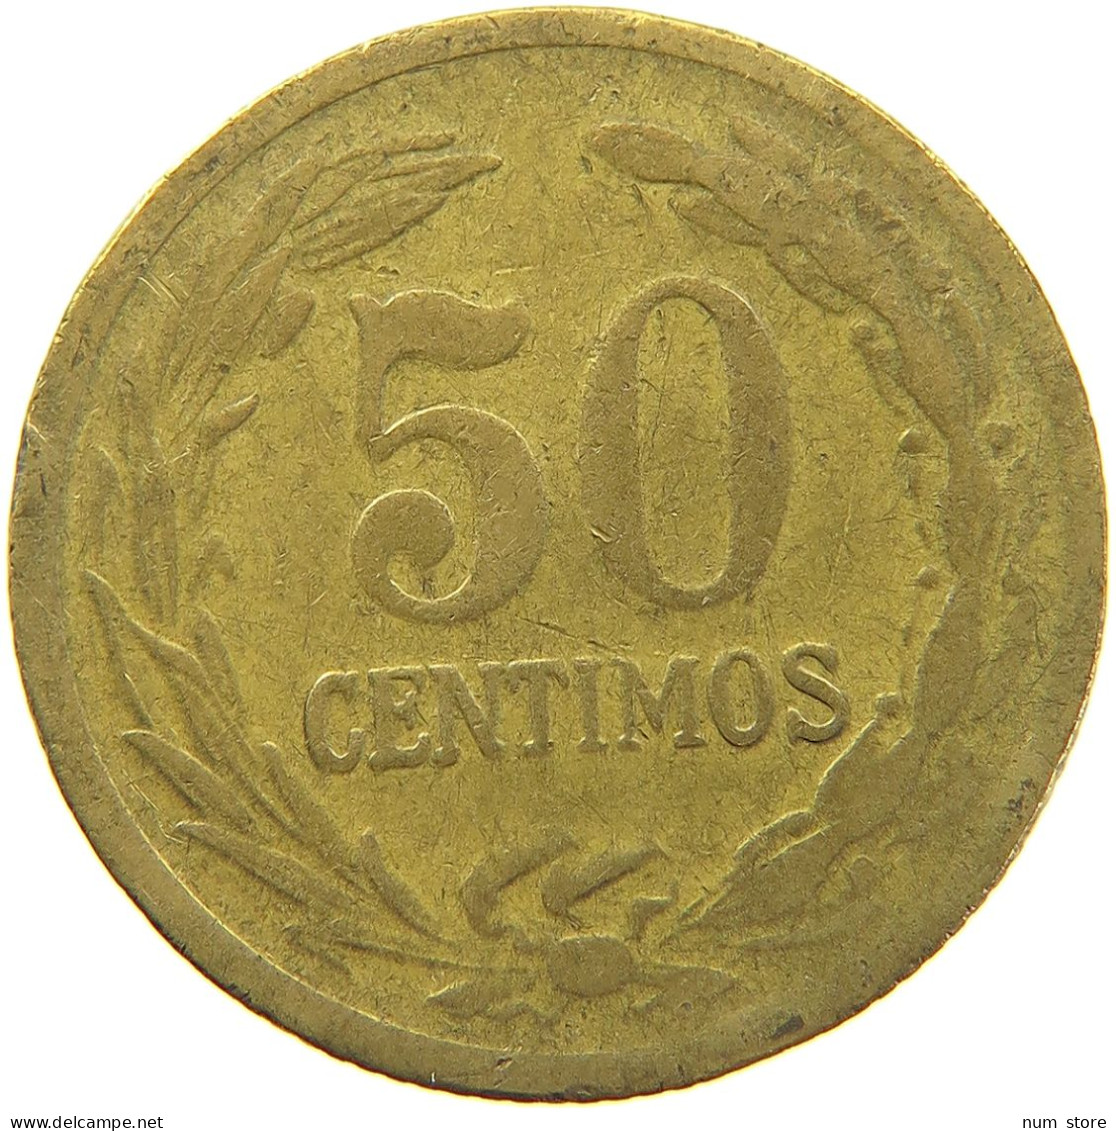 PARAGUAY 50 CENTIMOS 1944  #MA 067111 - Paraguay